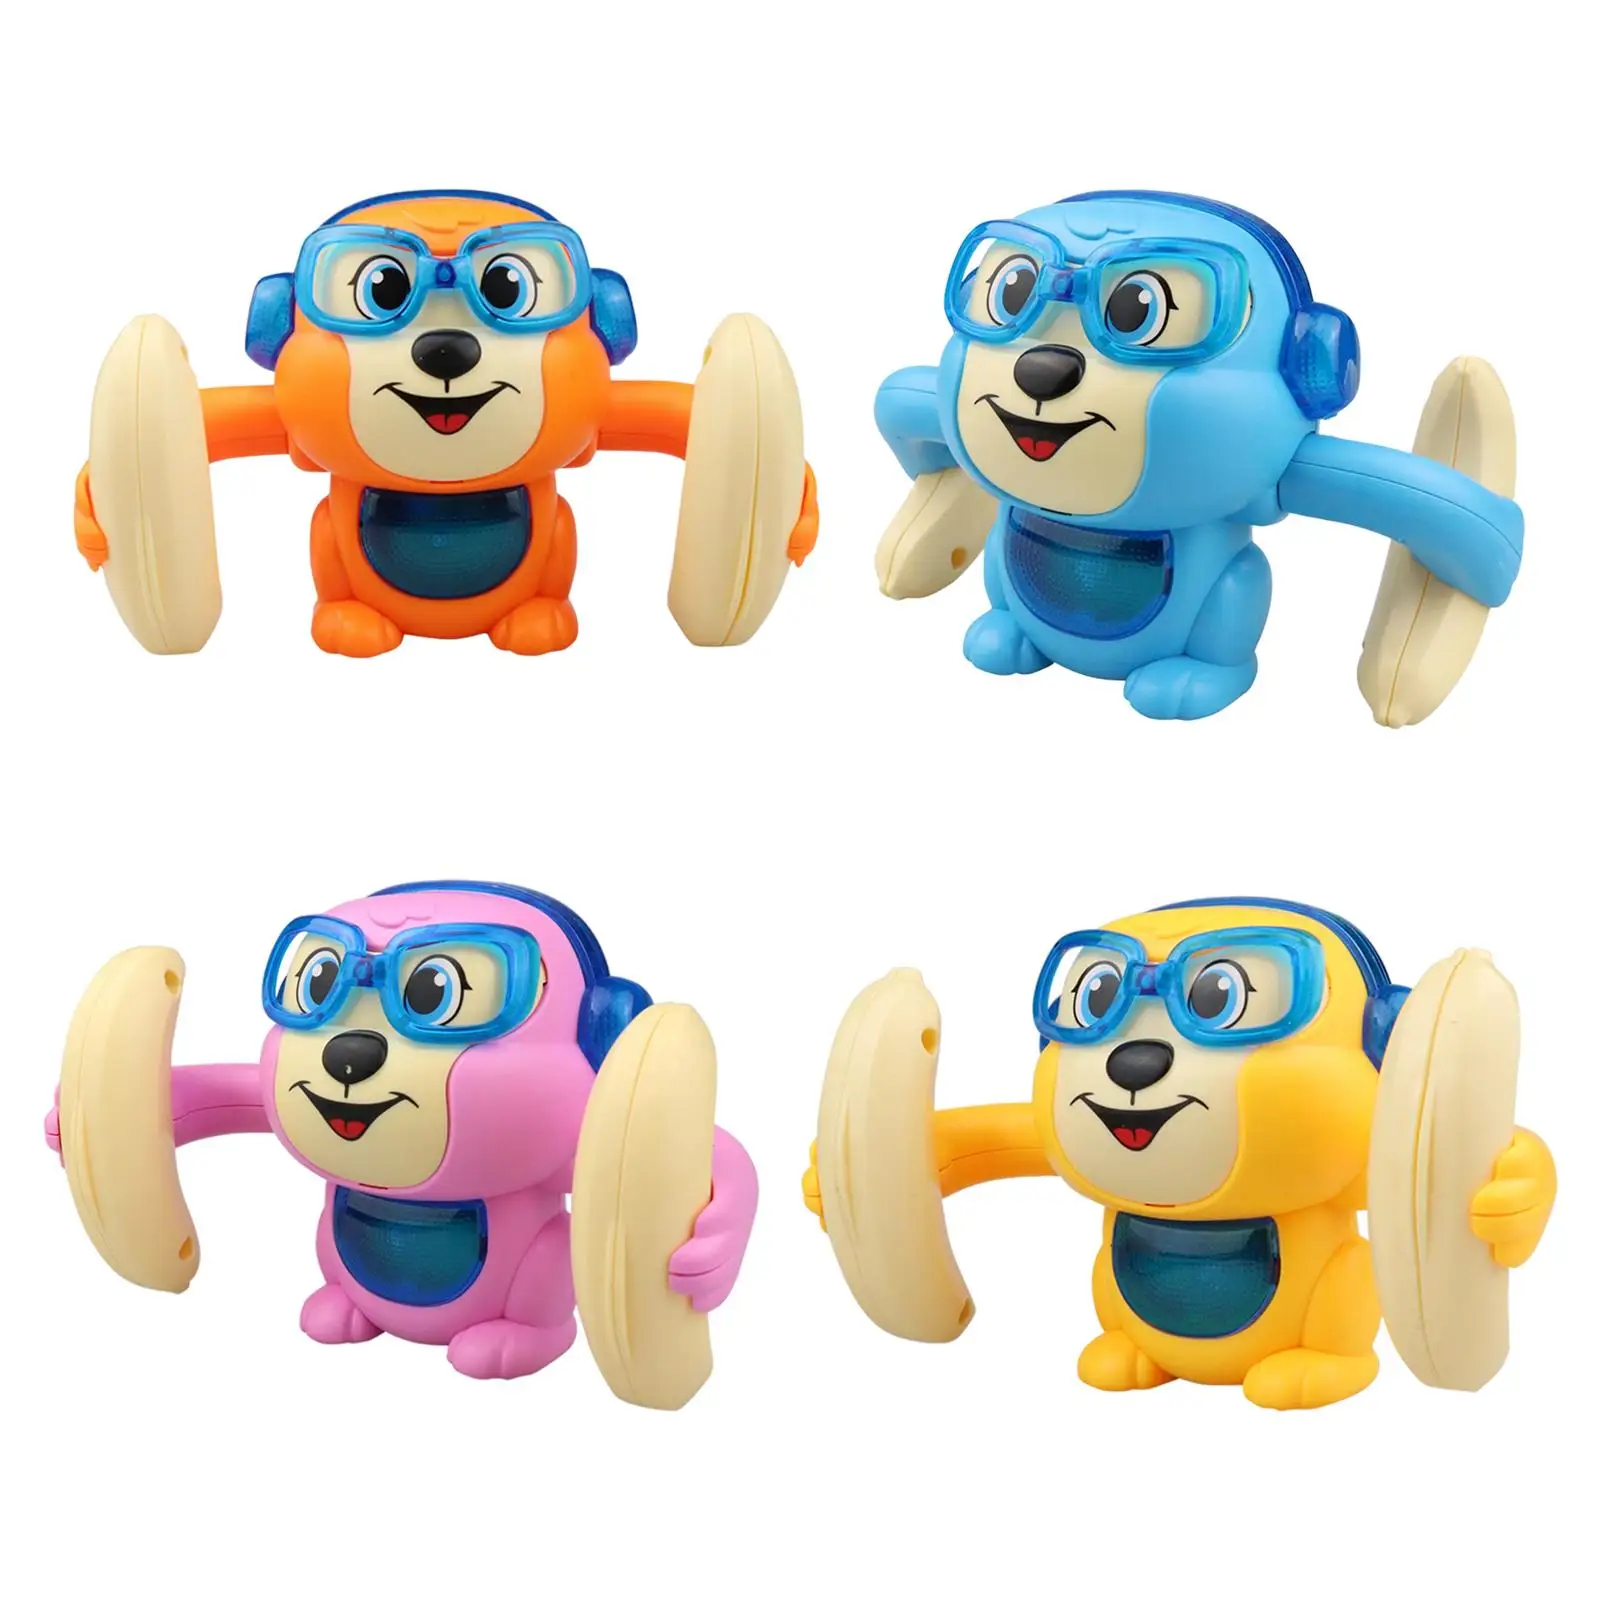 Monkey Musical Toys Early Educational Toys Voice Control for Kids Infants Birthday Gifts